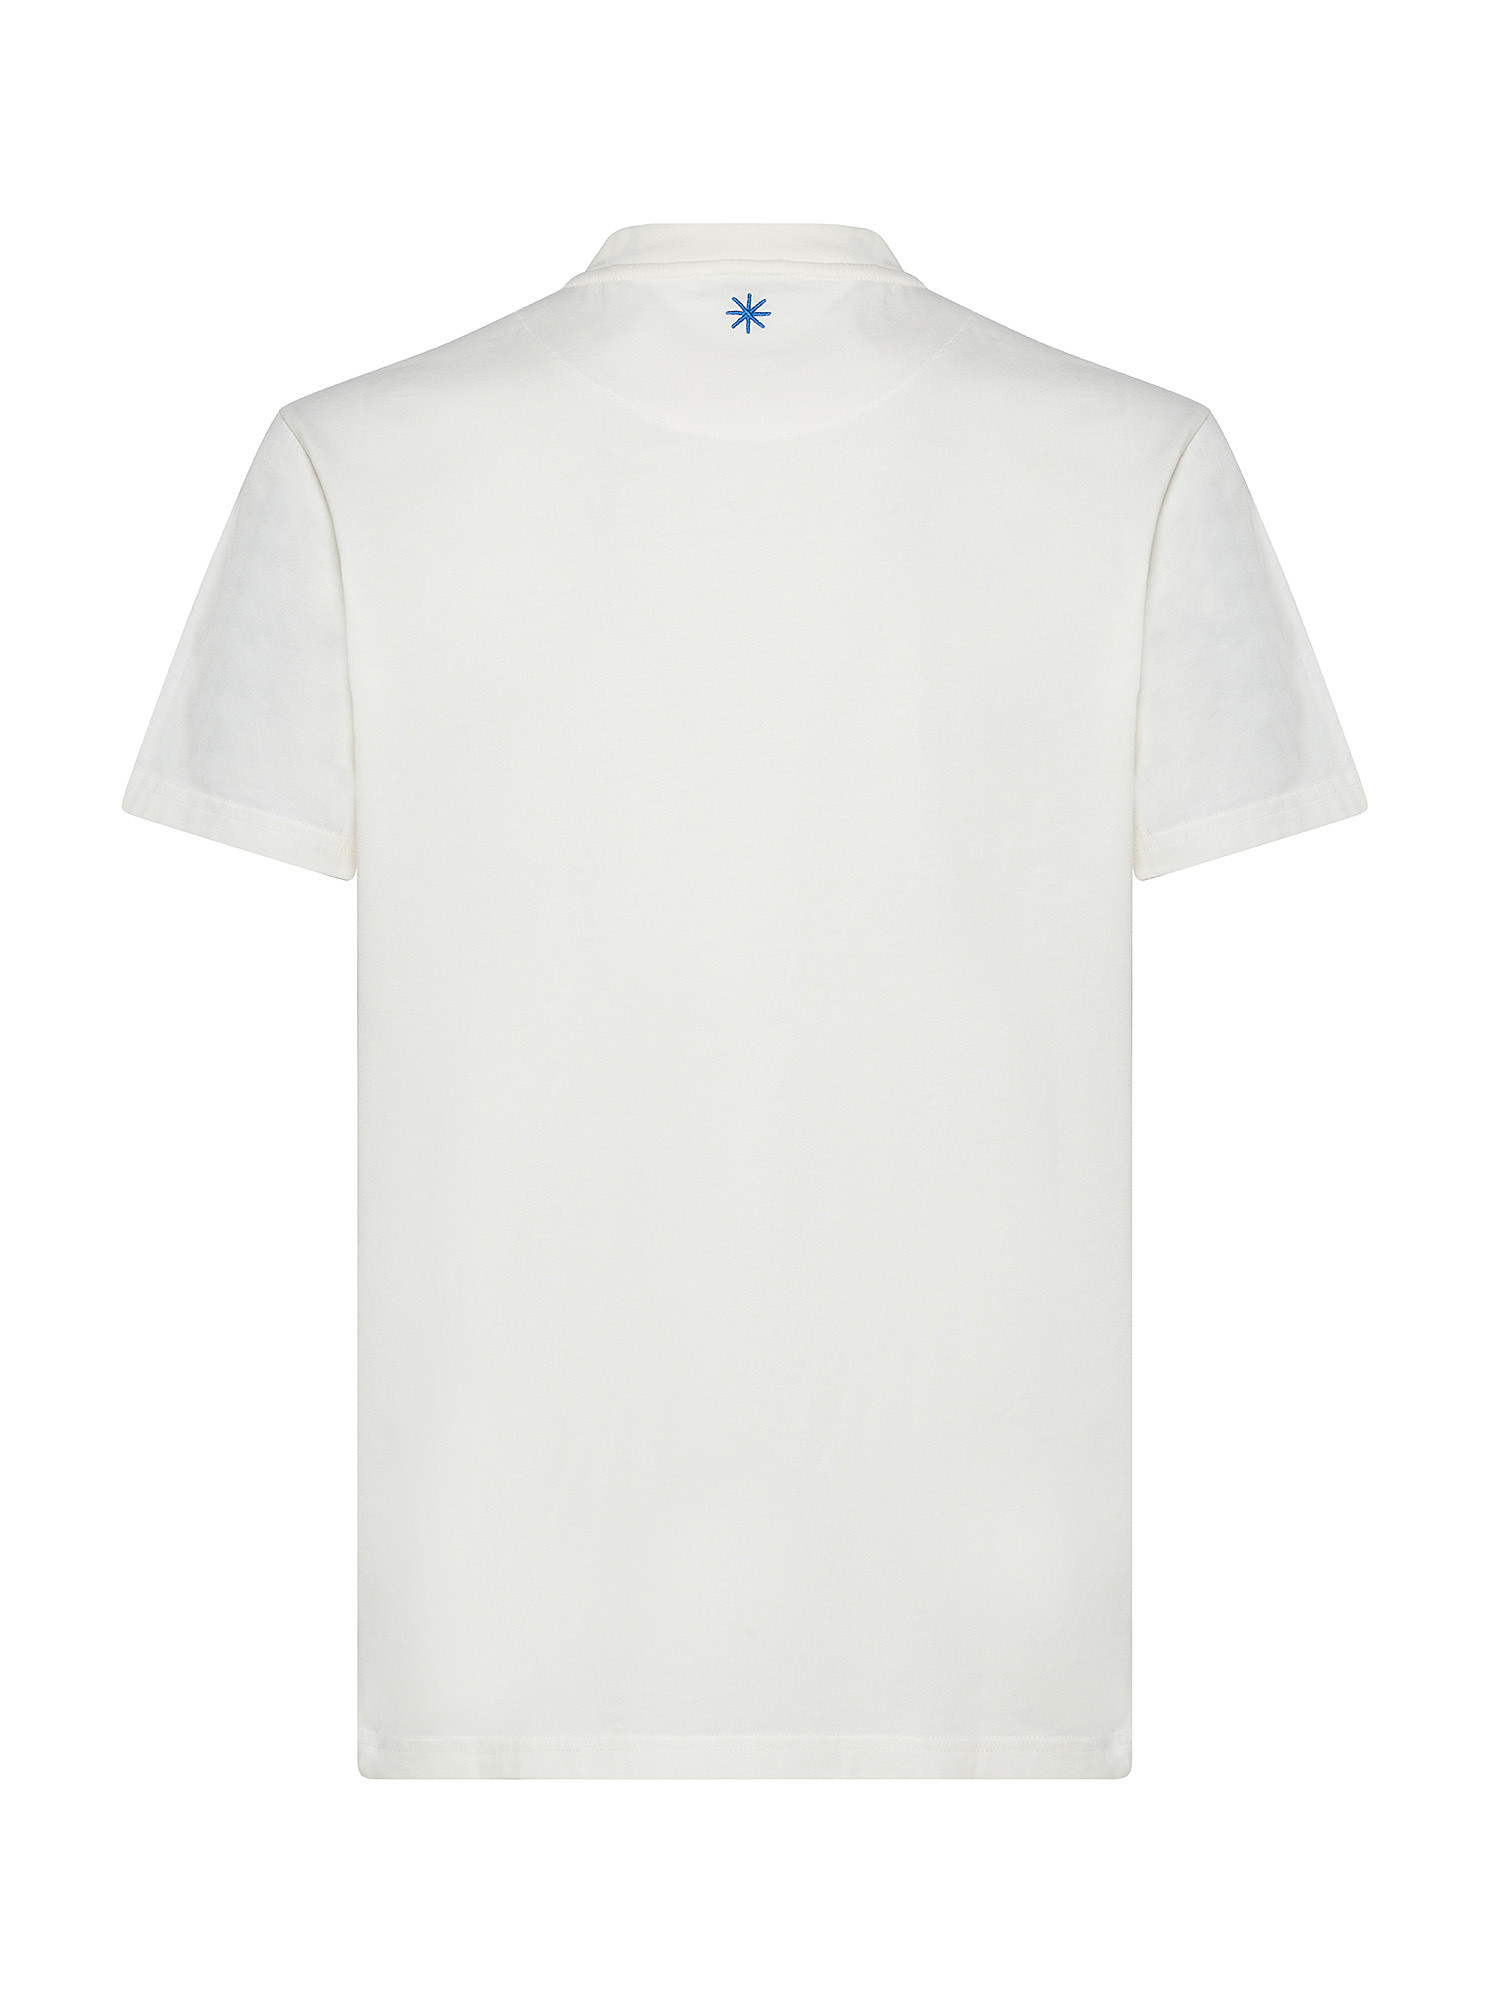 Manuel Ritz - T-shirt in cotone, Bianco, large image number 1